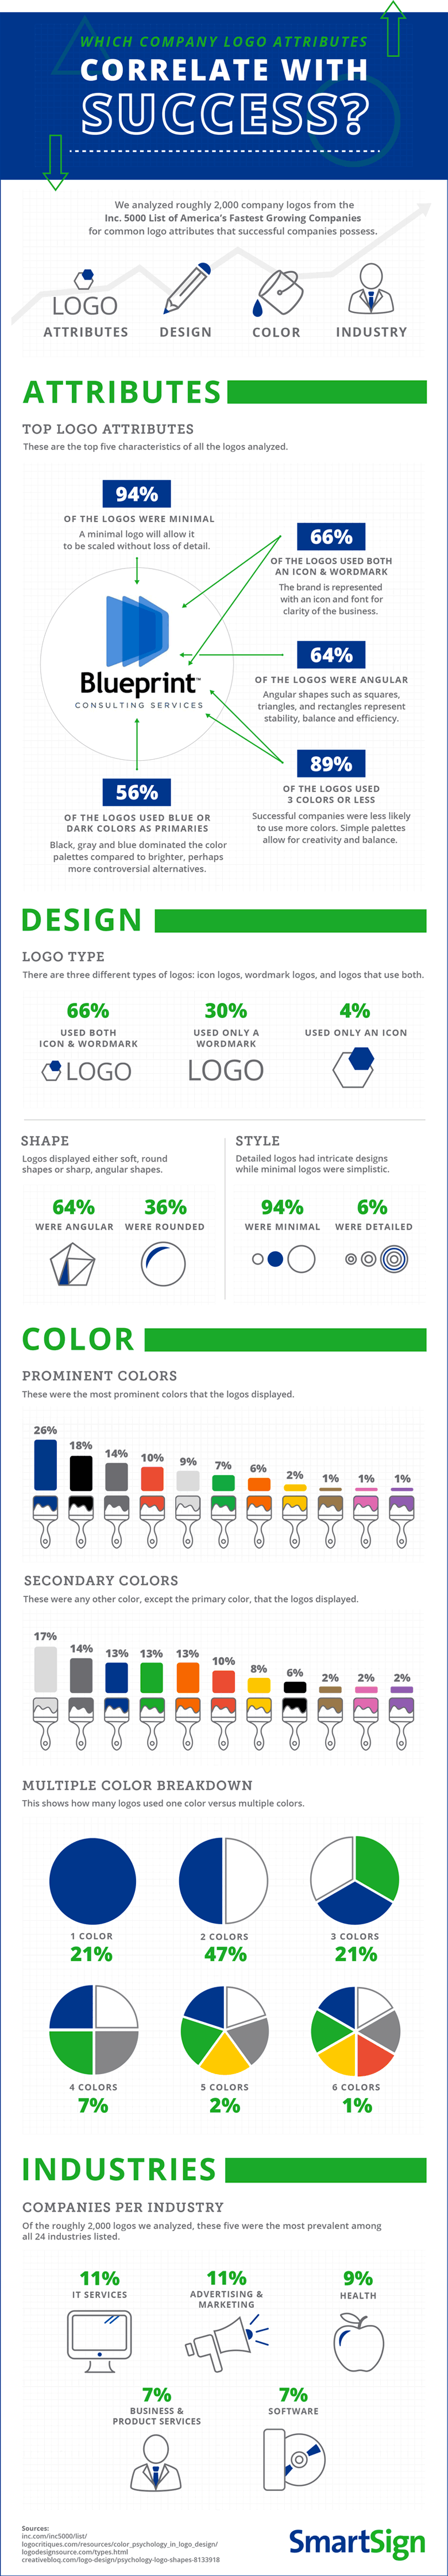 What Do The Logos Of Successful Companies Have In Common?